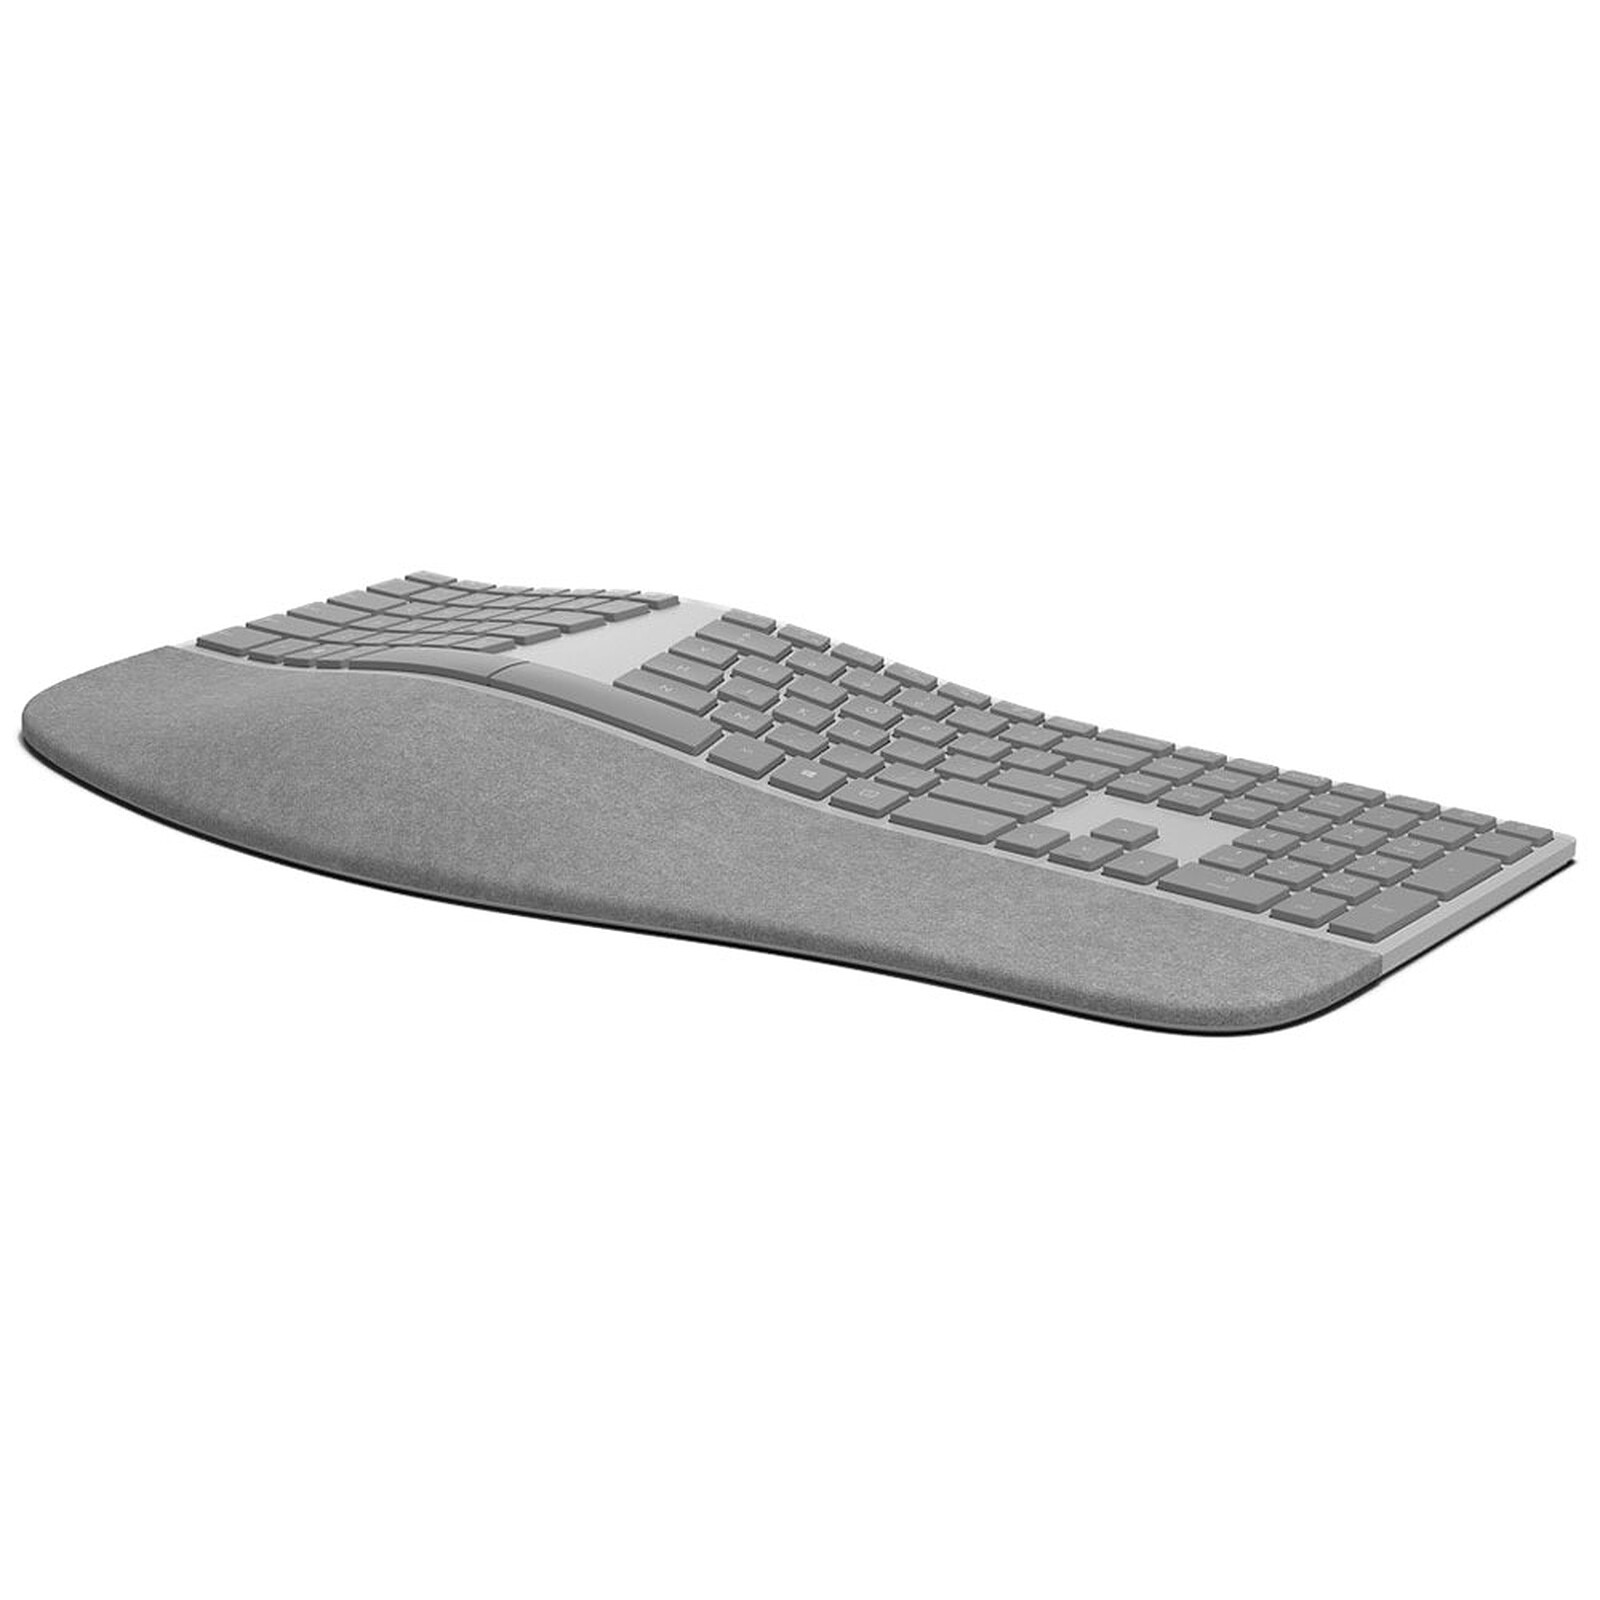 Support poignet clavier – Fit Super-Humain